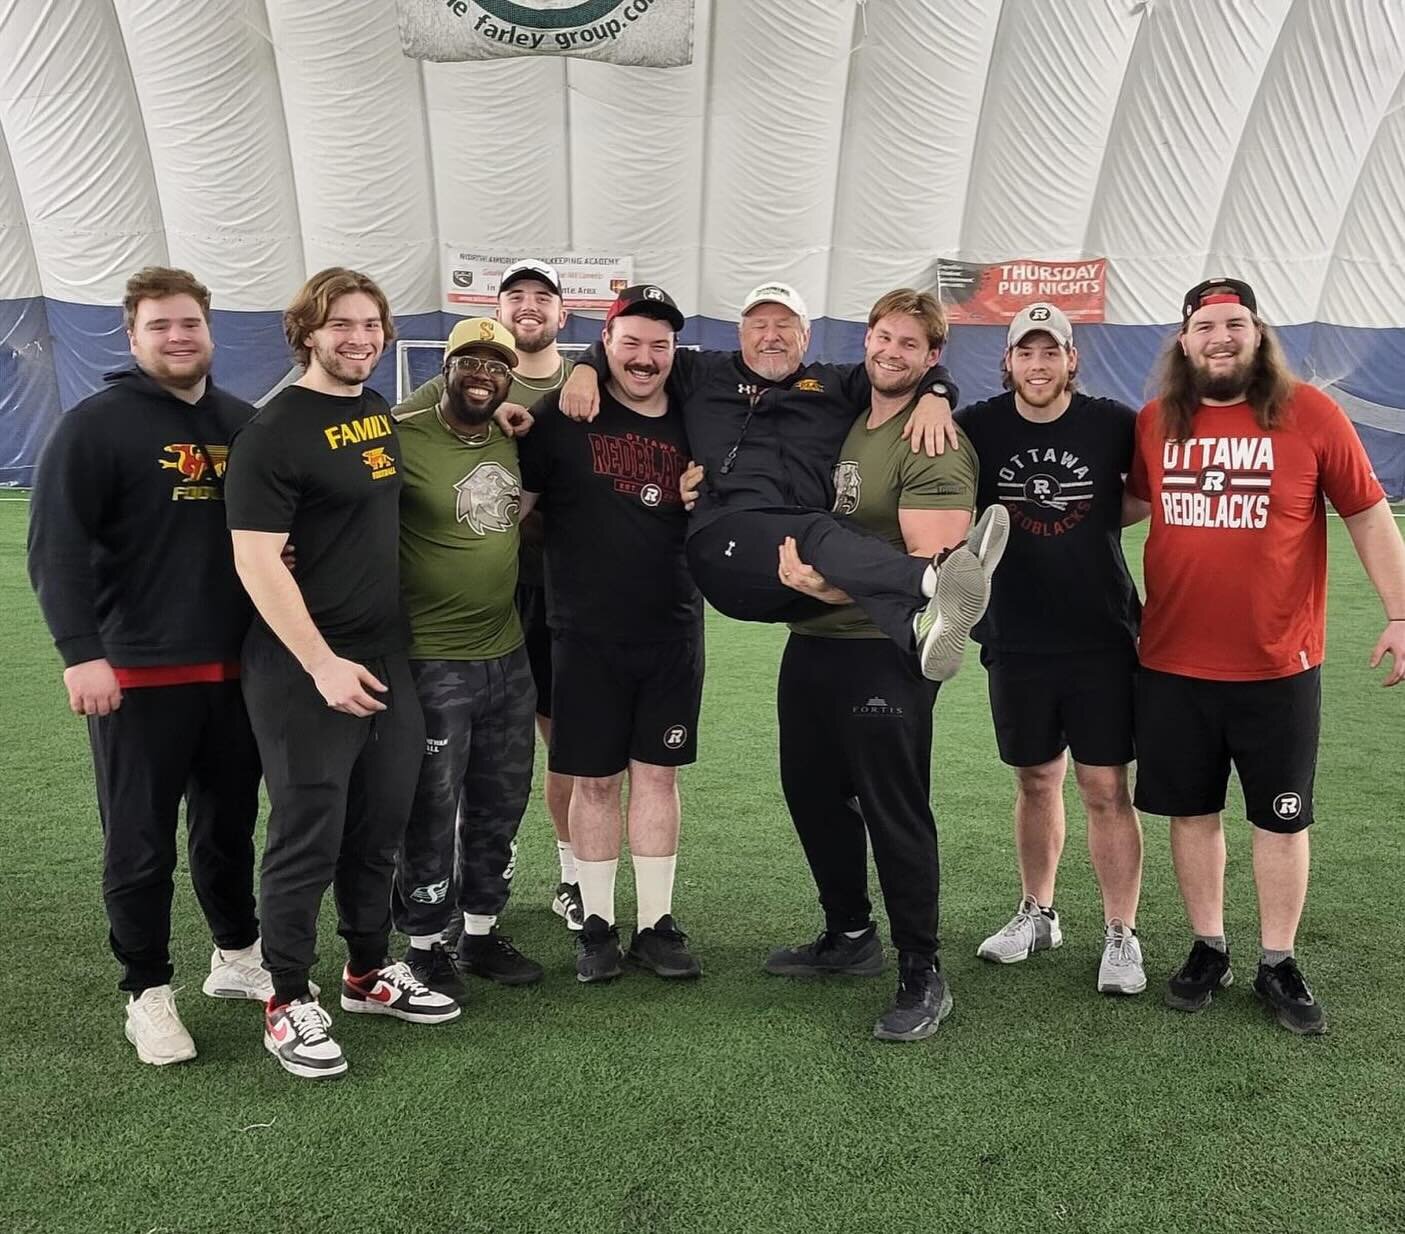 📰 Snapshots from the Gryphons&rsquo; Lair - Issue 86!

This monthly newsletter is the best way to learn about everything happening within our Football community.

February newsletter features: 

🏈 Aiden Kuepfer- Player 
🏈 Juwan Jeffrey - Alumni
🏈